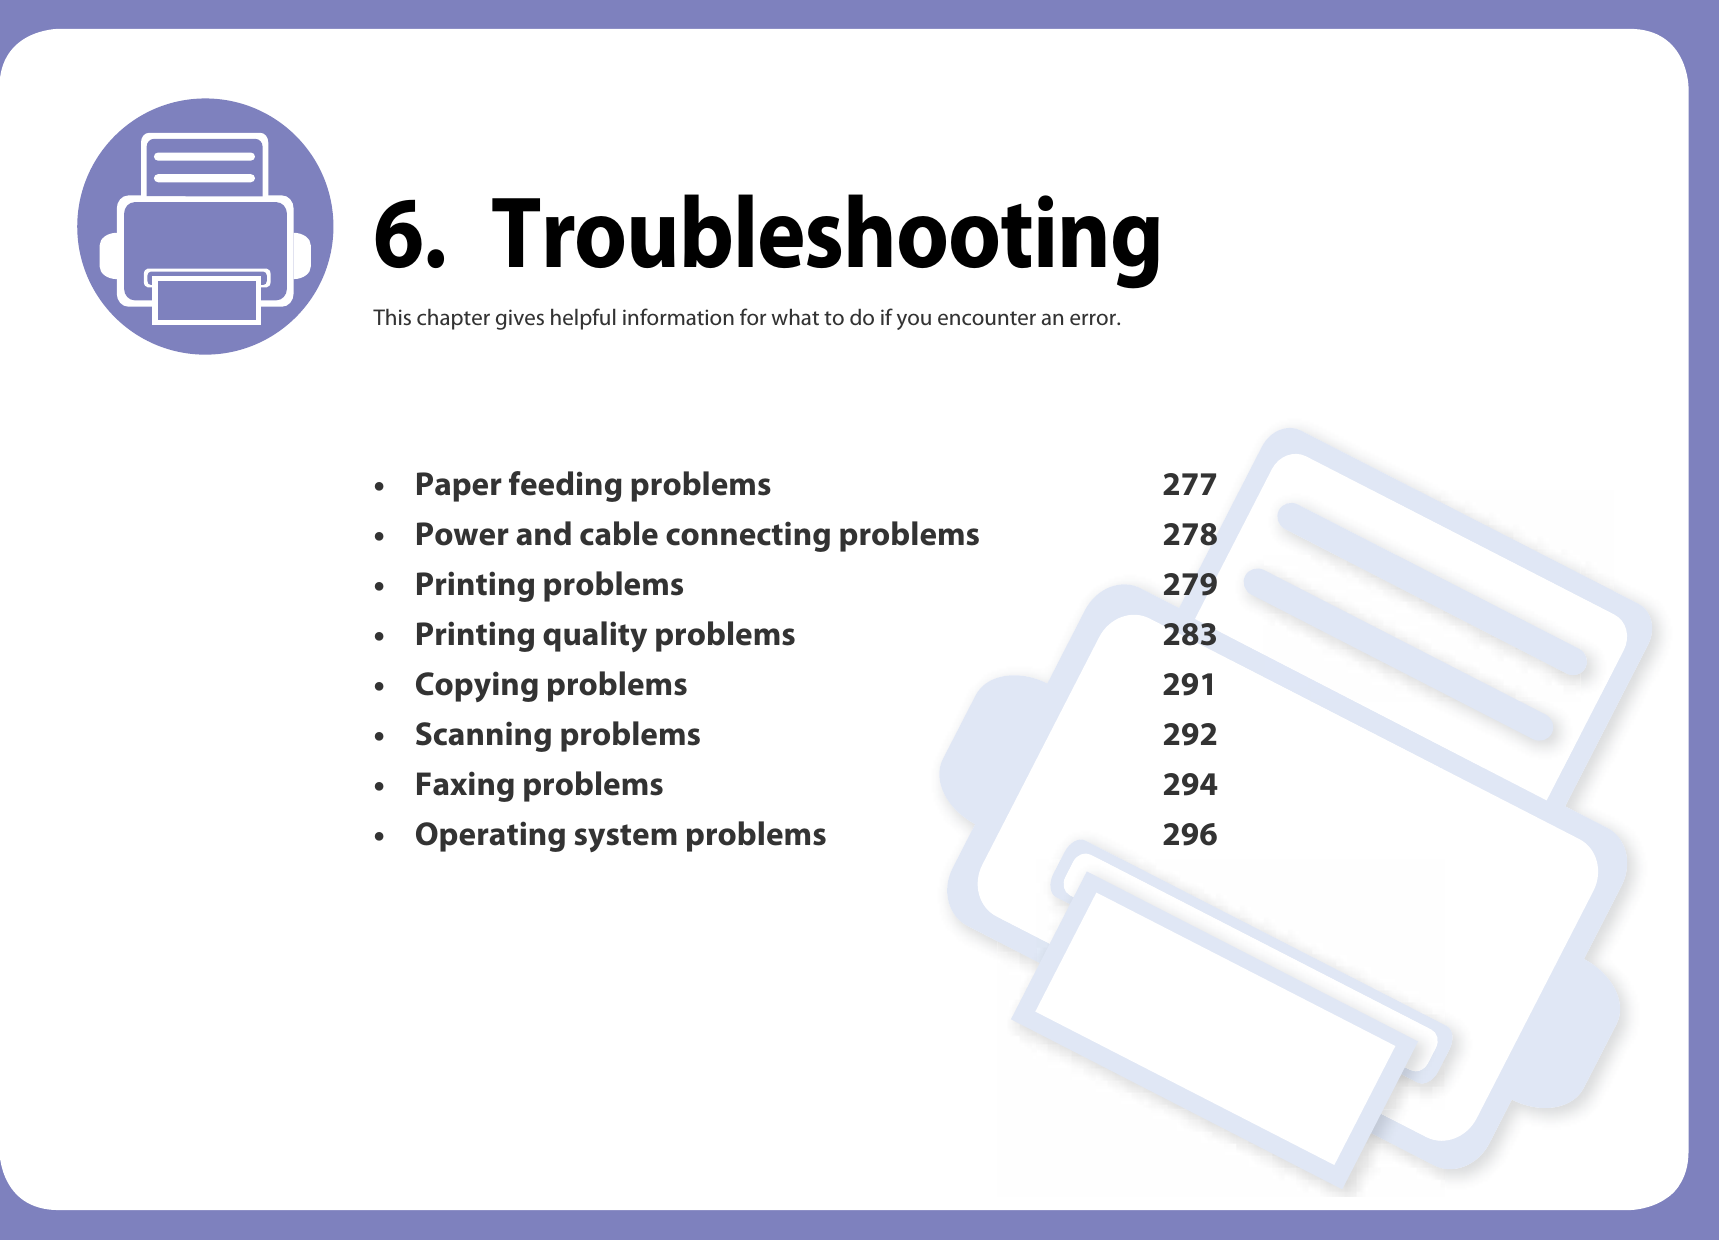 6. TroubleshootingThis chapter gives helpful information for what to do if you encounter an error.• Paper feeding problems 277• Power and cable connecting problems 278• Printing problems 279• Printing quality problems 283• Copying problems 291• Scanning problems 292• Faxing problems 294• Operating system problems 296